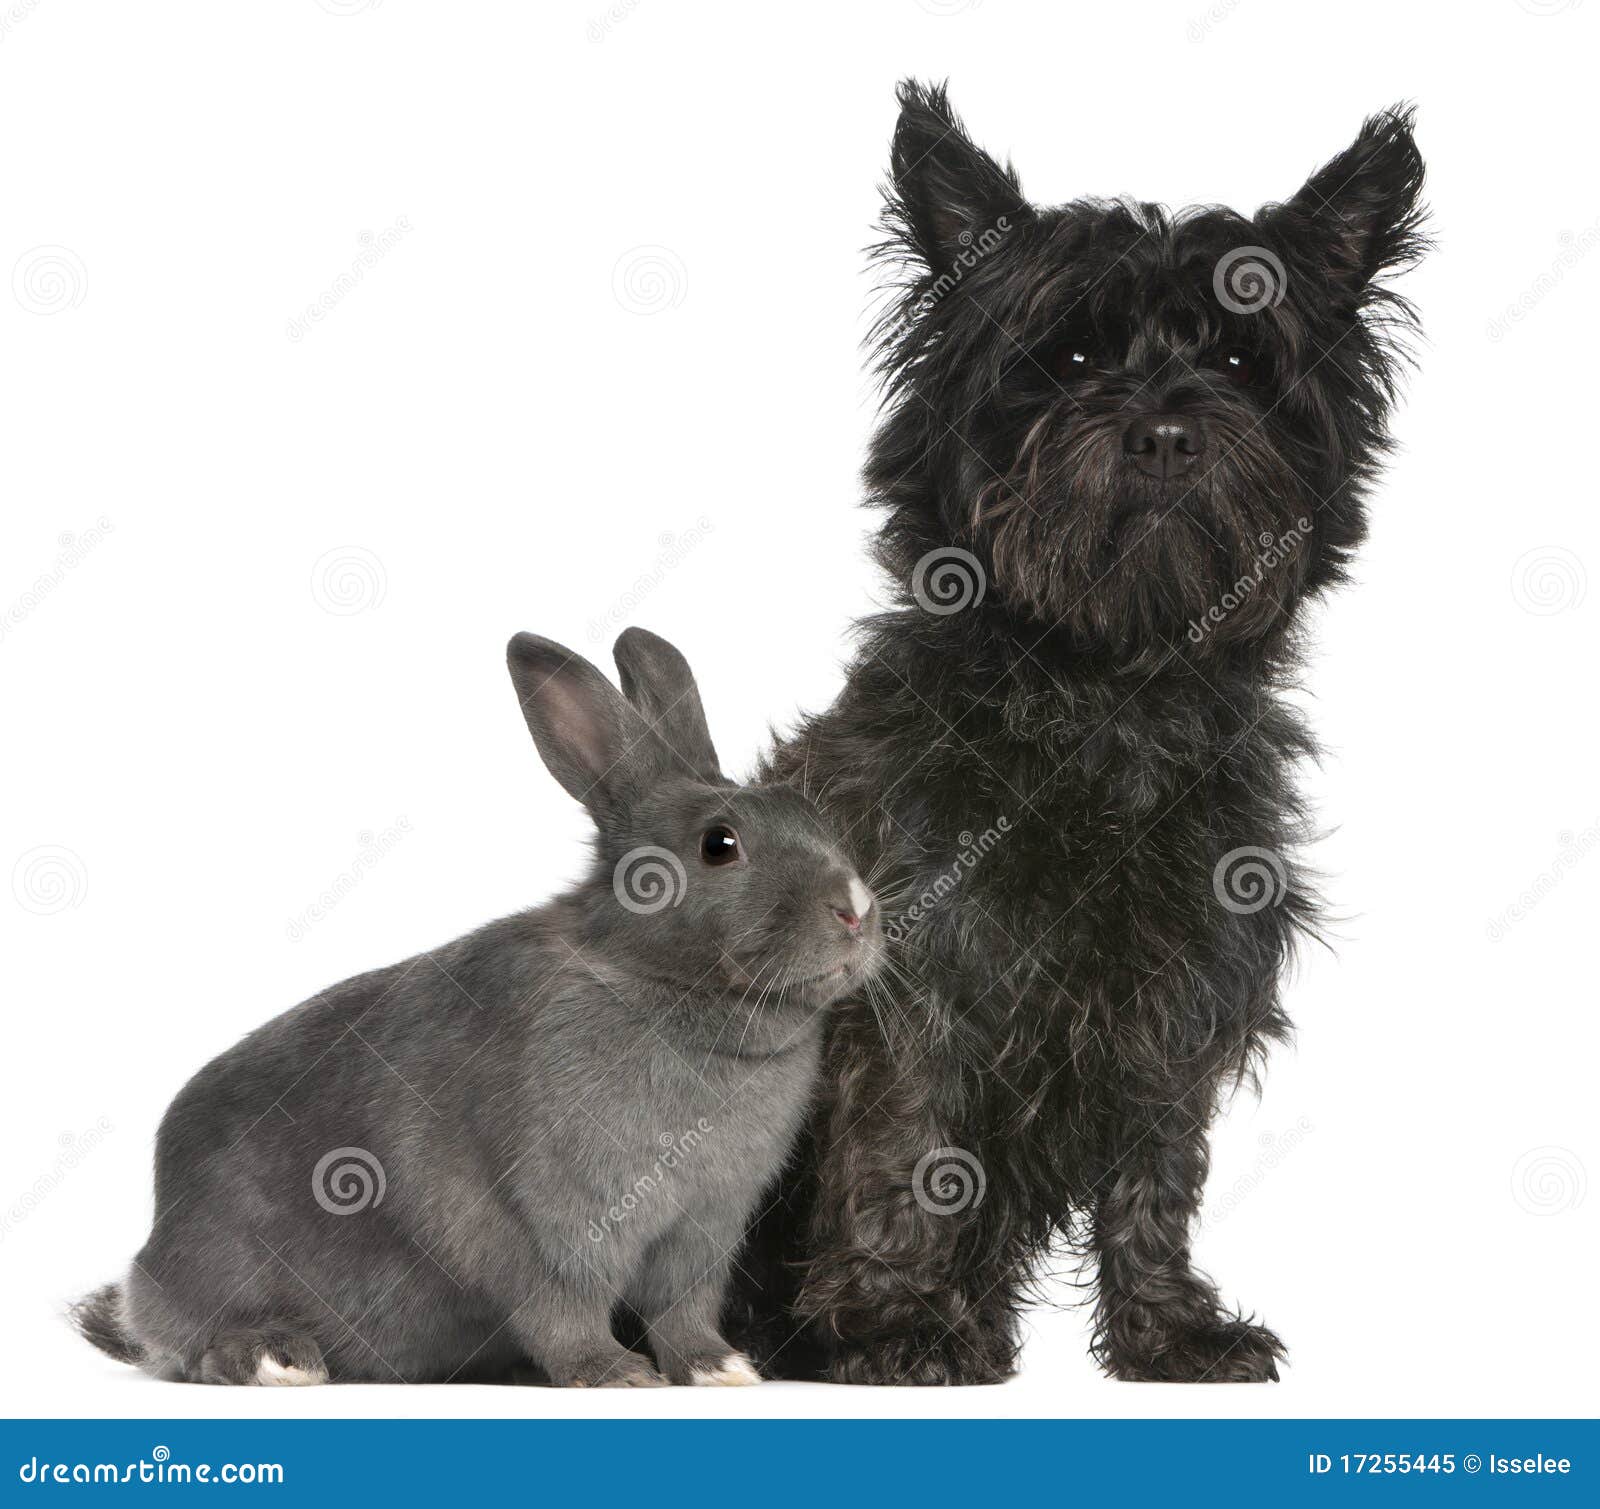 cairn terrier, 4 years old, and a rabbit